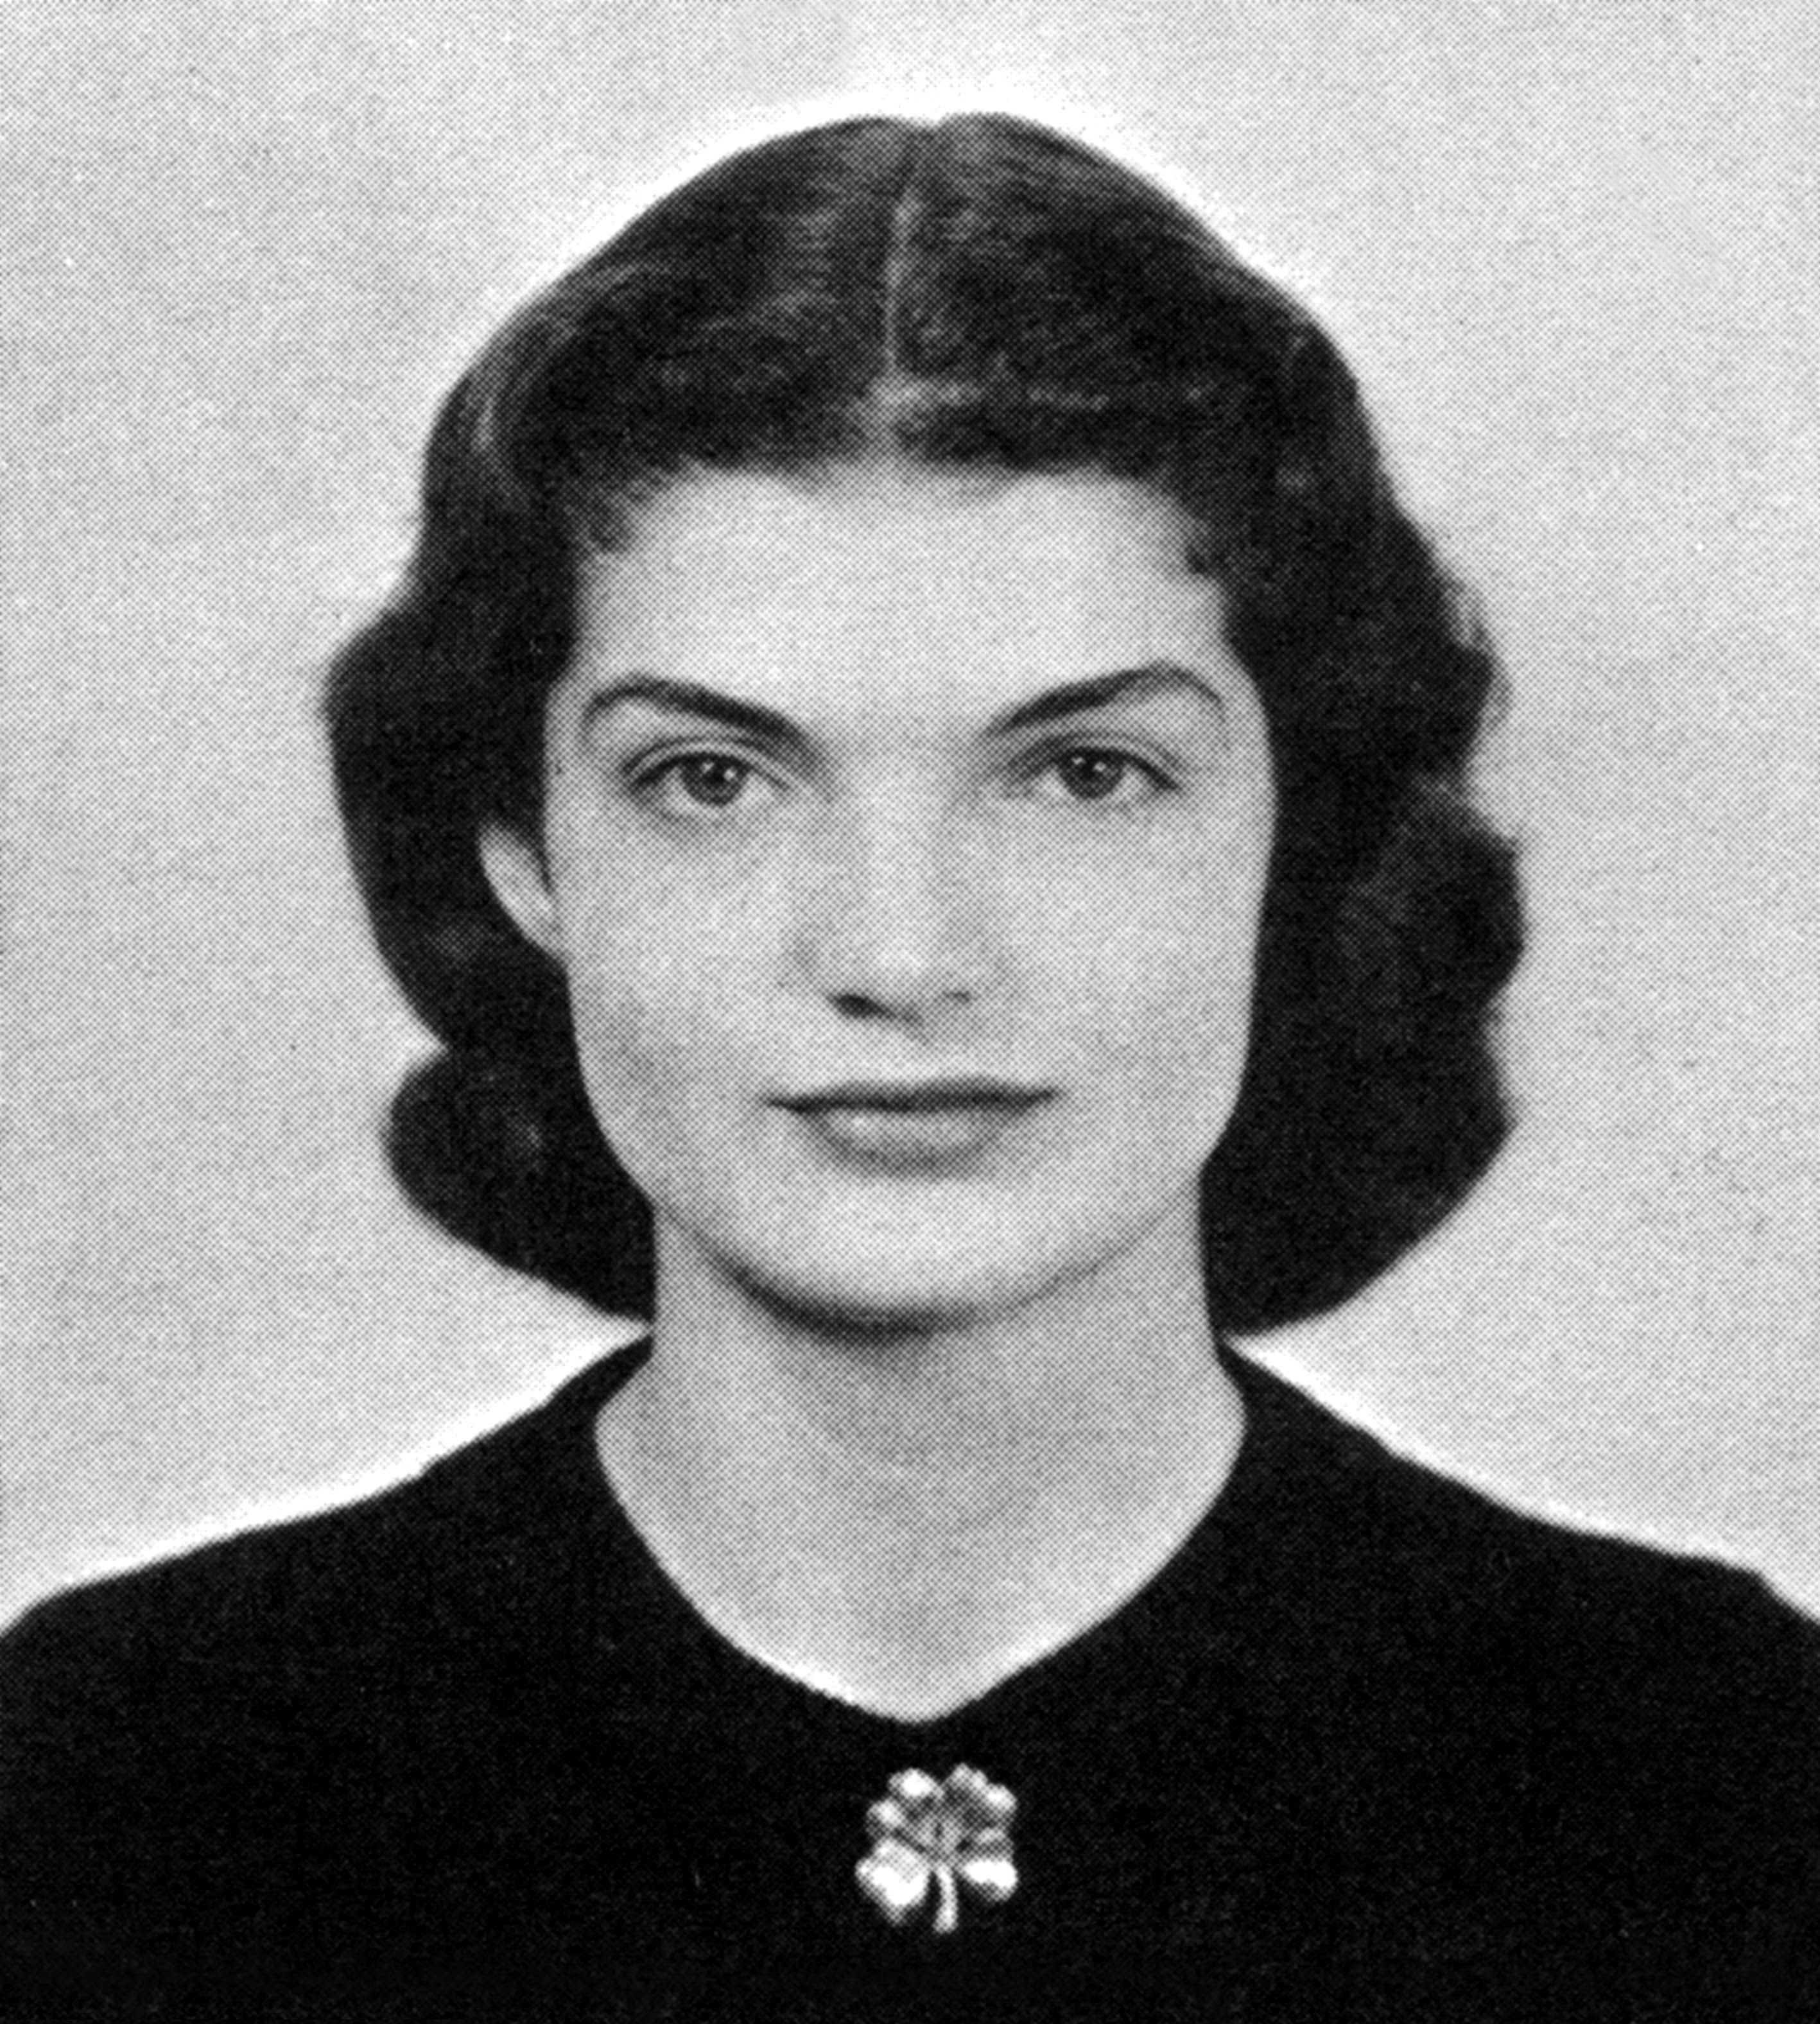 Jacqueline Lee Bouvier who was later known as Jackie Kennedy on October 1, 1950. | Source: Getty Images